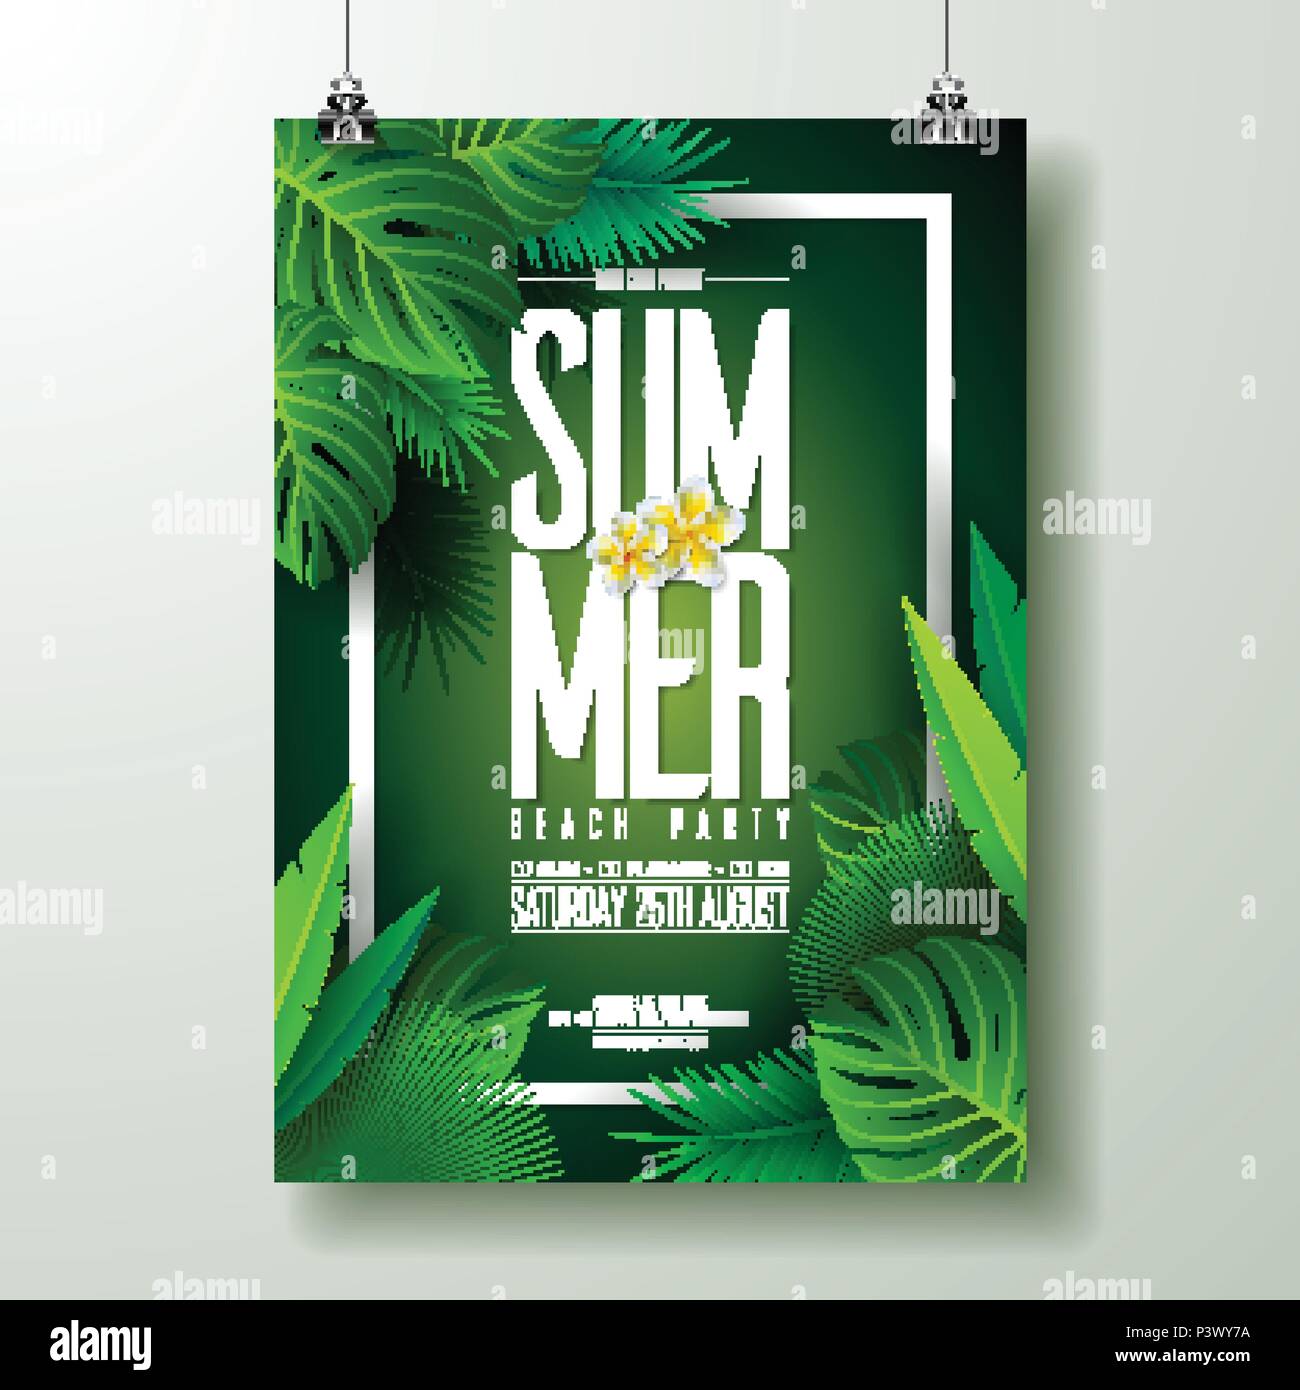 Vector Summer Beach Party Flyer Design with typographic elements on exotic leaf background. Summer nature floral elements, tropical plants, flower. Design template for banner, flyer, invitation, poster. Stock Vector